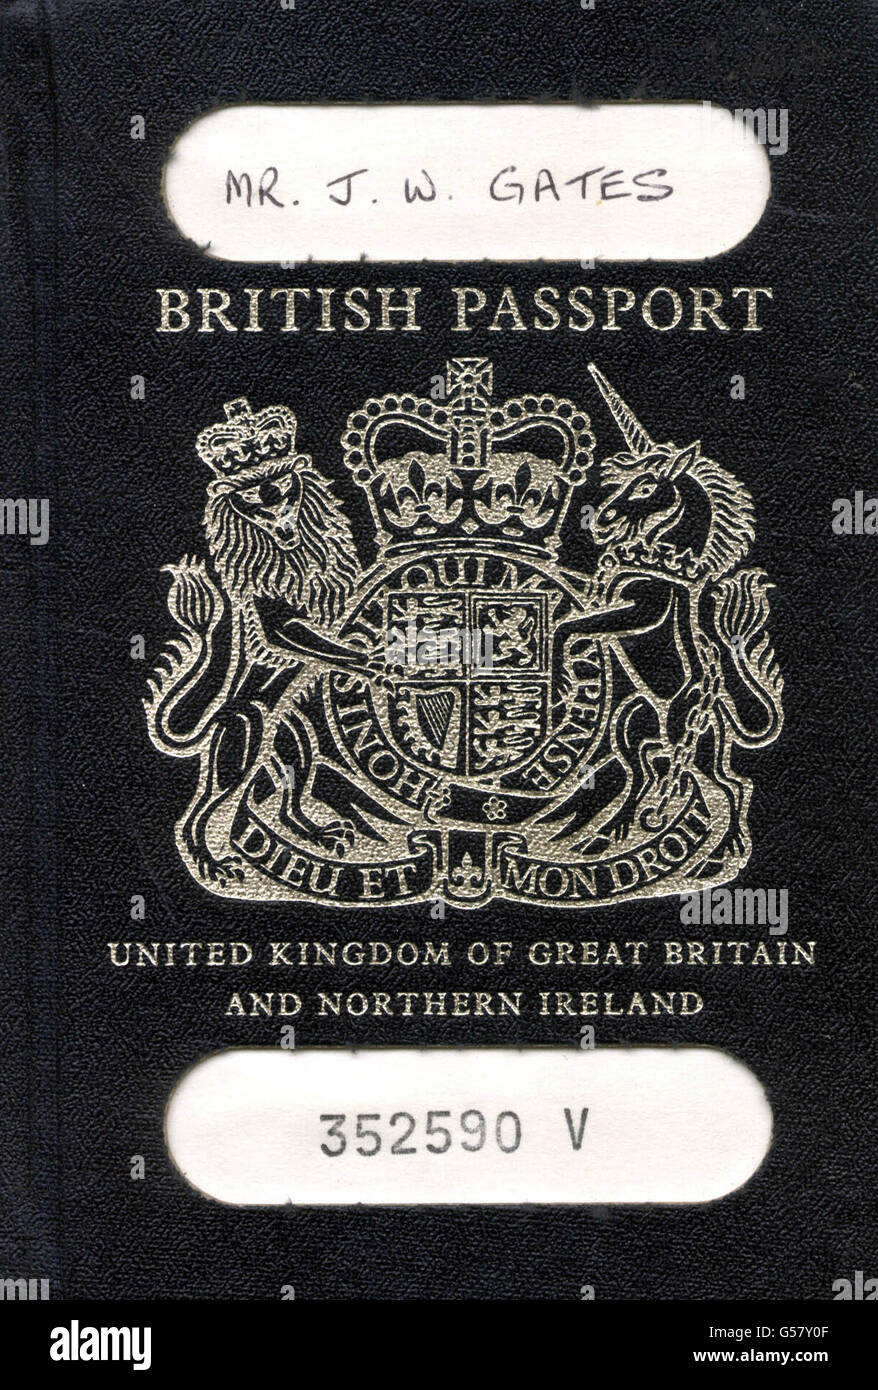 The front cover of the Press Association's travel writer Jeremy Gates' passport. Stock Photo